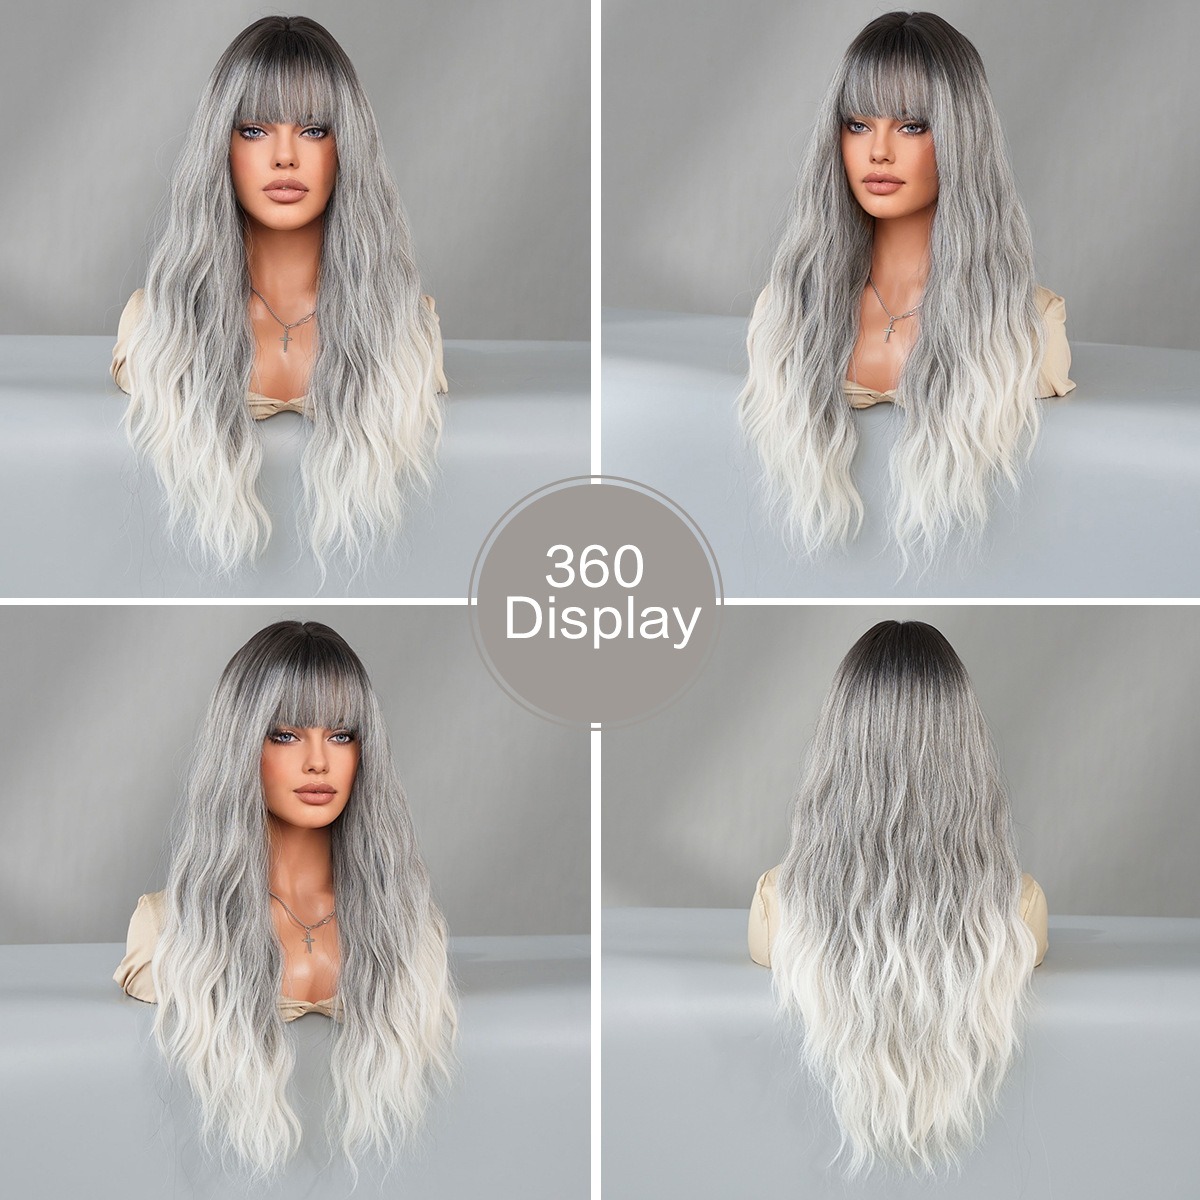 A fashionable synthetic wig with gray gradient long curly hair styled in large waves, ideal for a trendy style